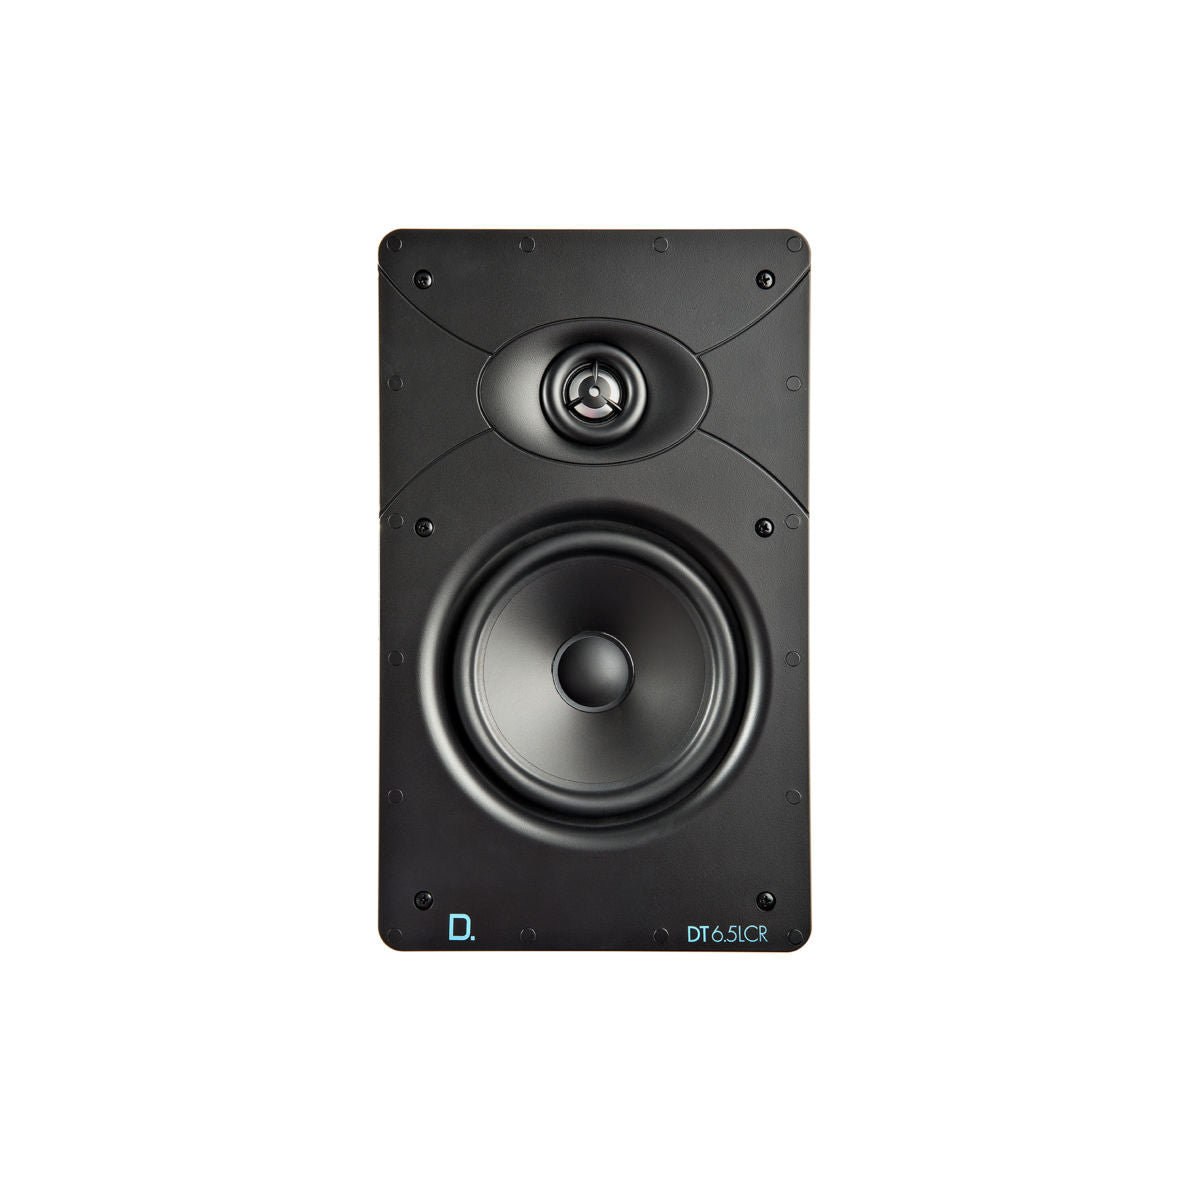 Definitive Technology DT 6.5 LCR DT Series Rectangular In-Wall Speaker - Ooberpad India